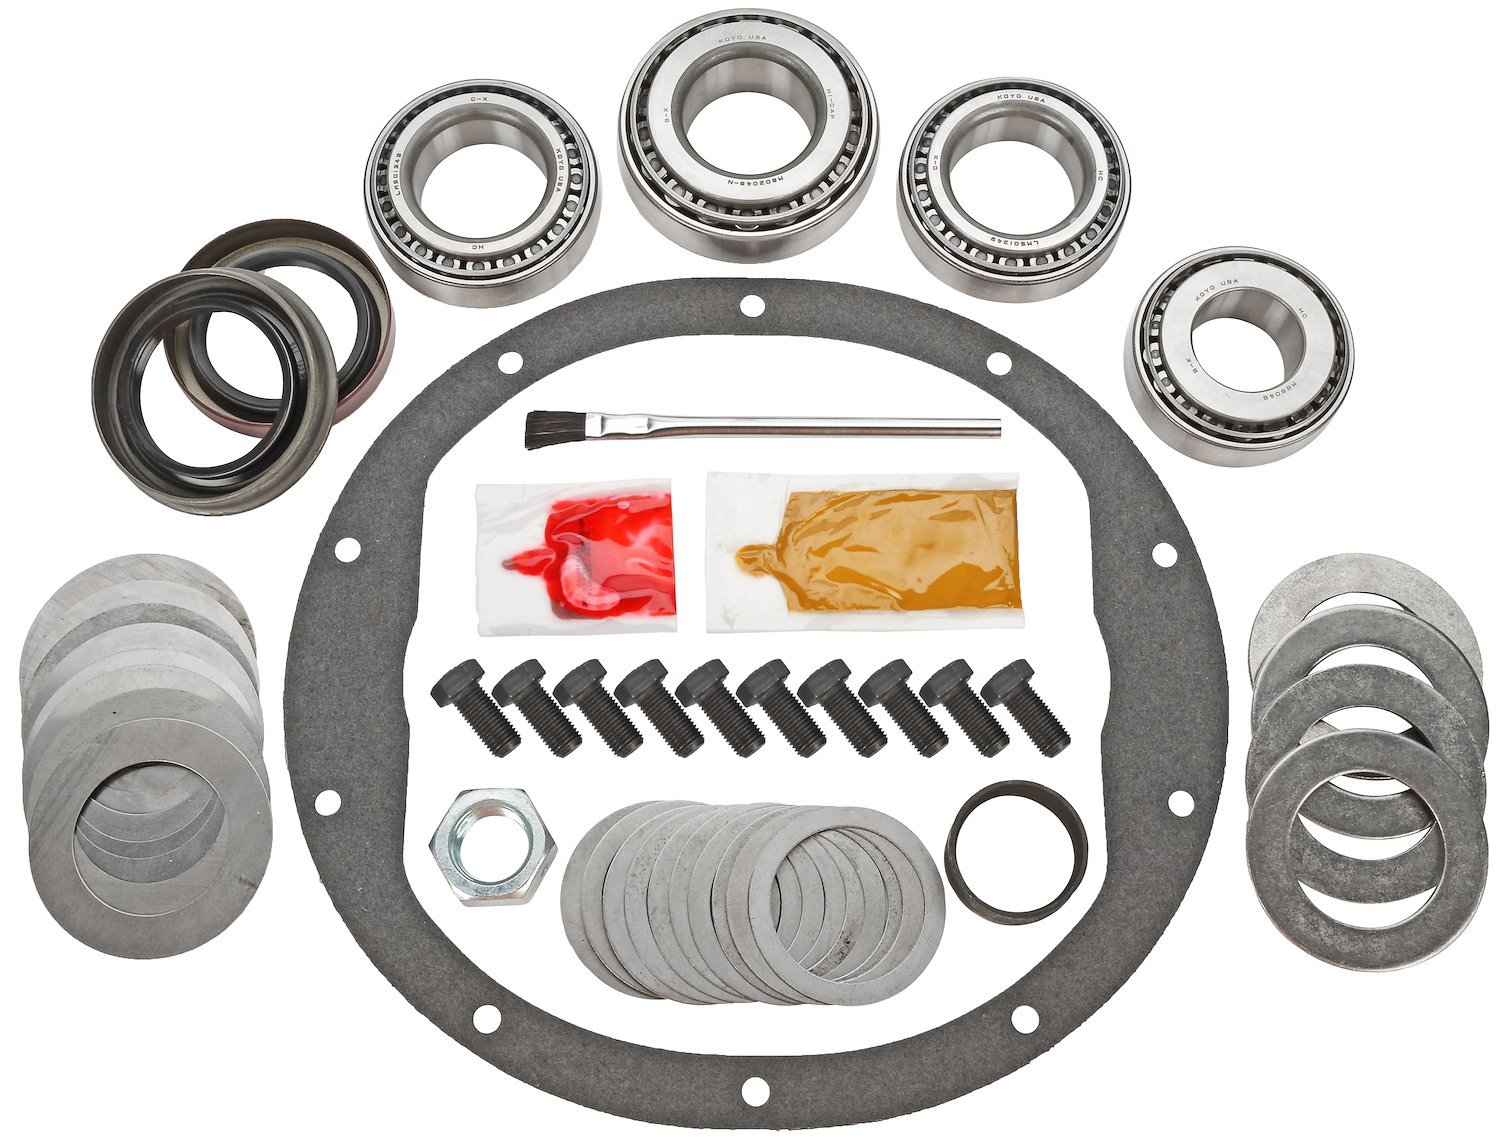 Complete Differential Installation Kit for Select 1970-1999 GM Model Cars with GM 8.5 in. 10-Bolt and 30-Spline Pinion Shaft